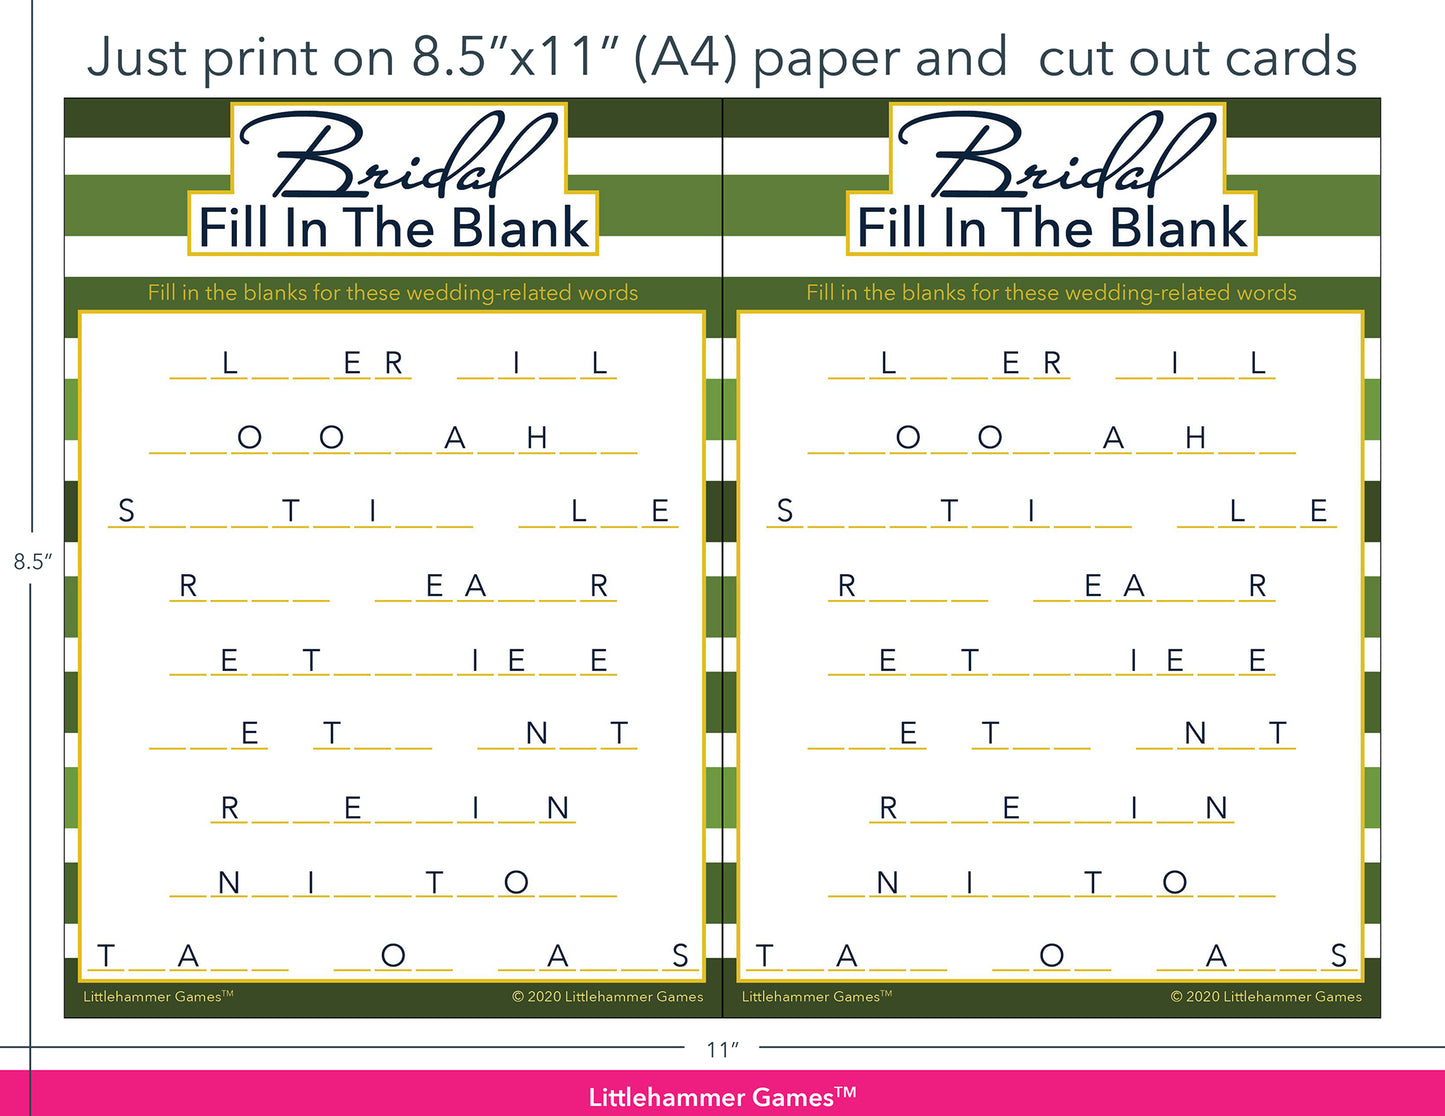 Bridal Fill in the Blank green-striped game cards with printing instructions